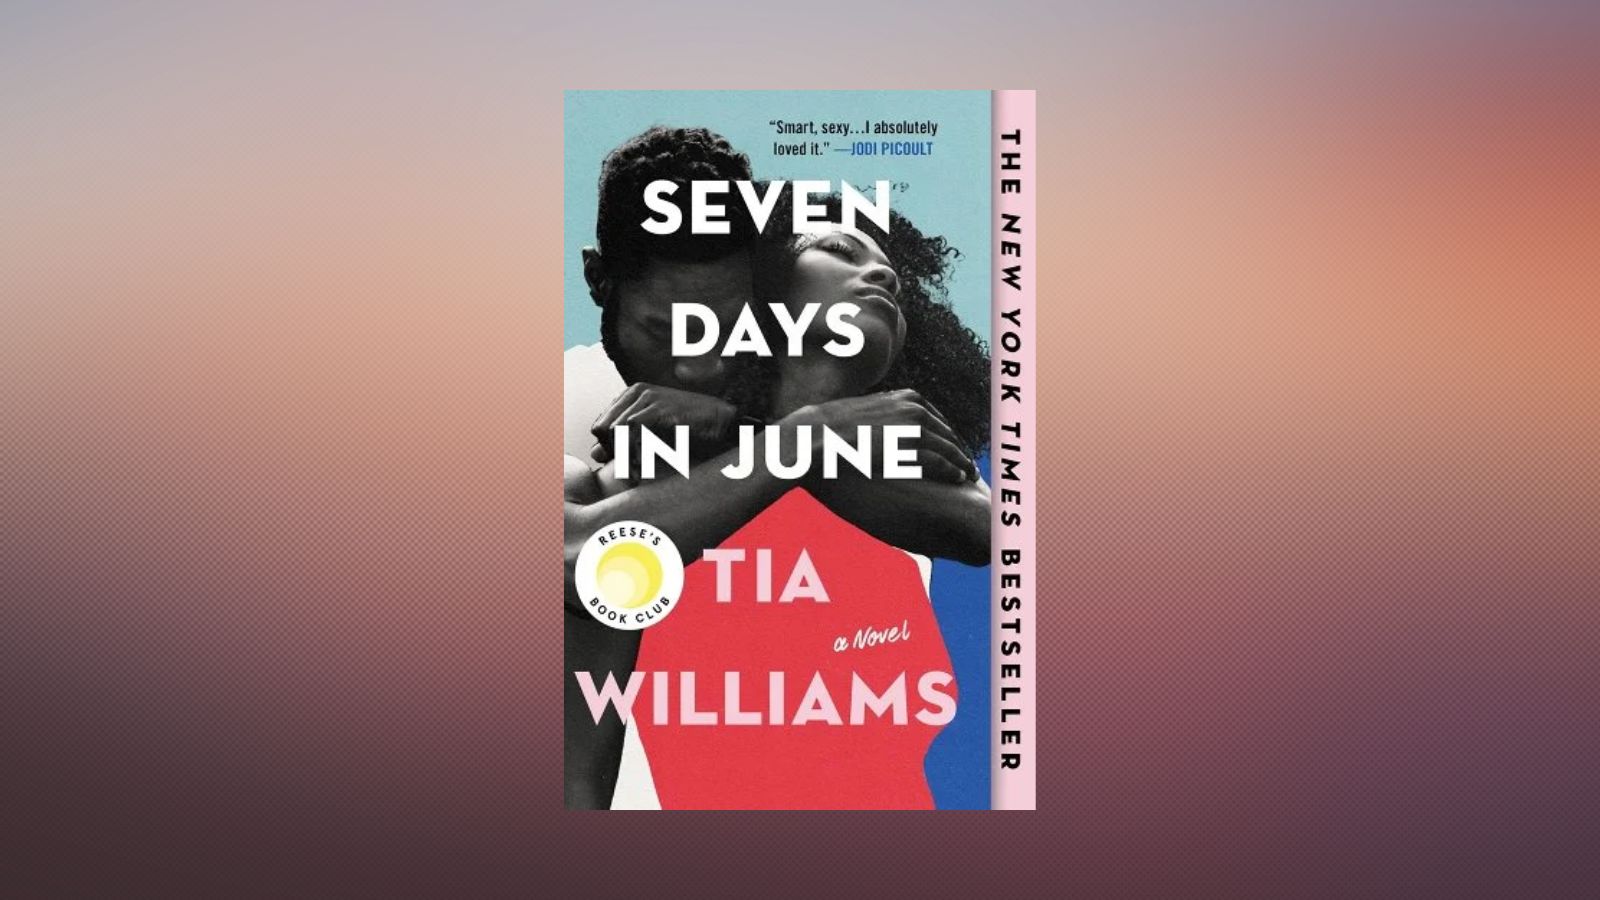 "Seven Days in June" book cover with blurred color background.